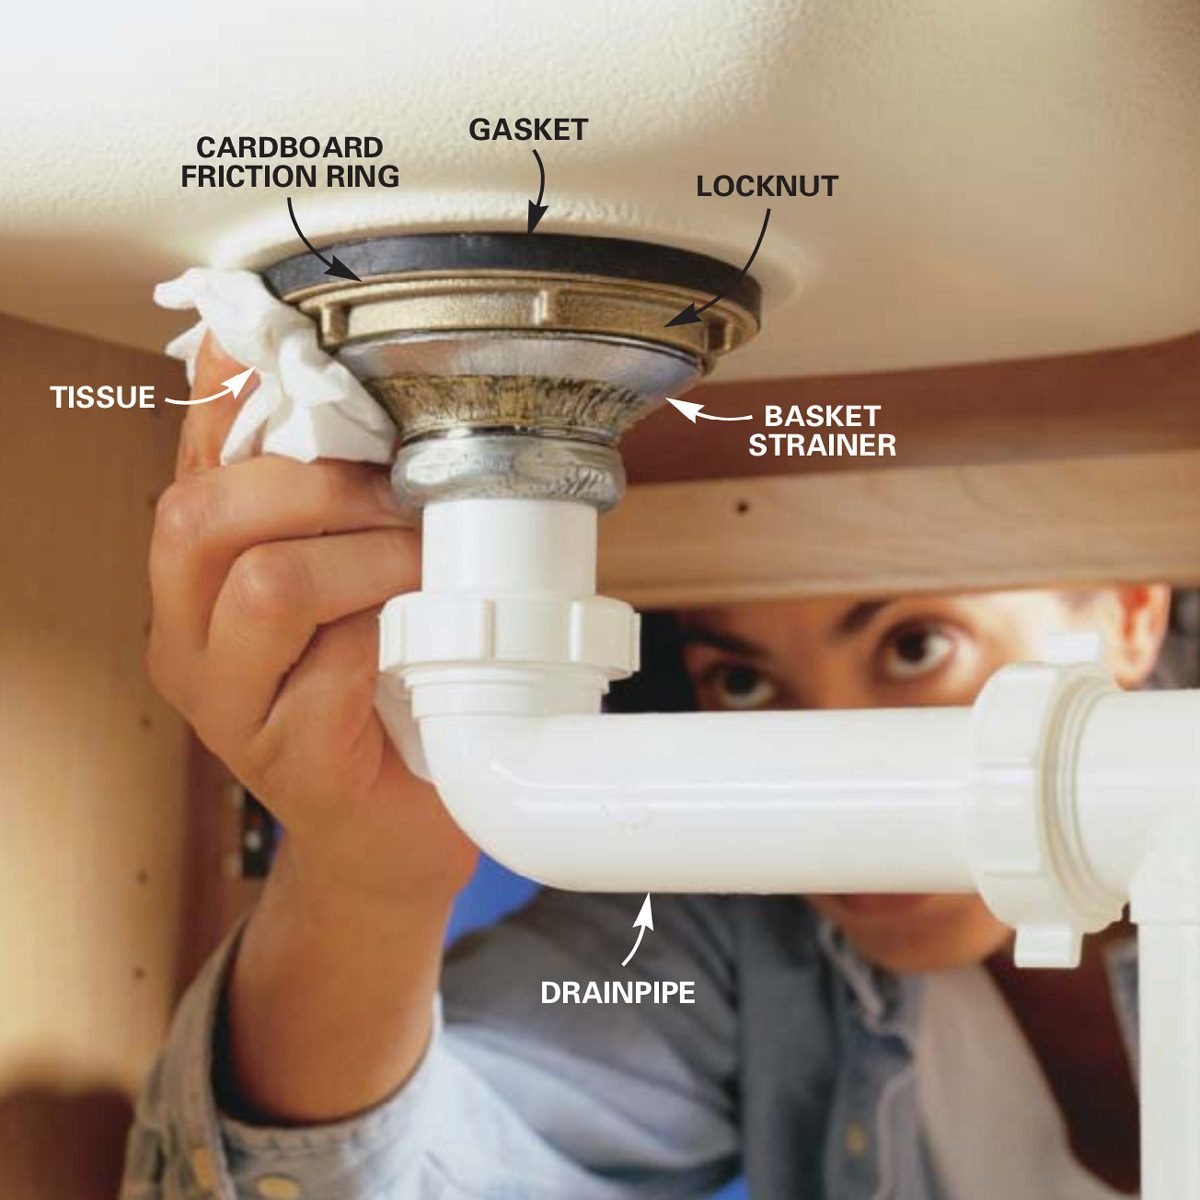 How To Replace A Kitchen Sink Basket Strainer Family Handyman